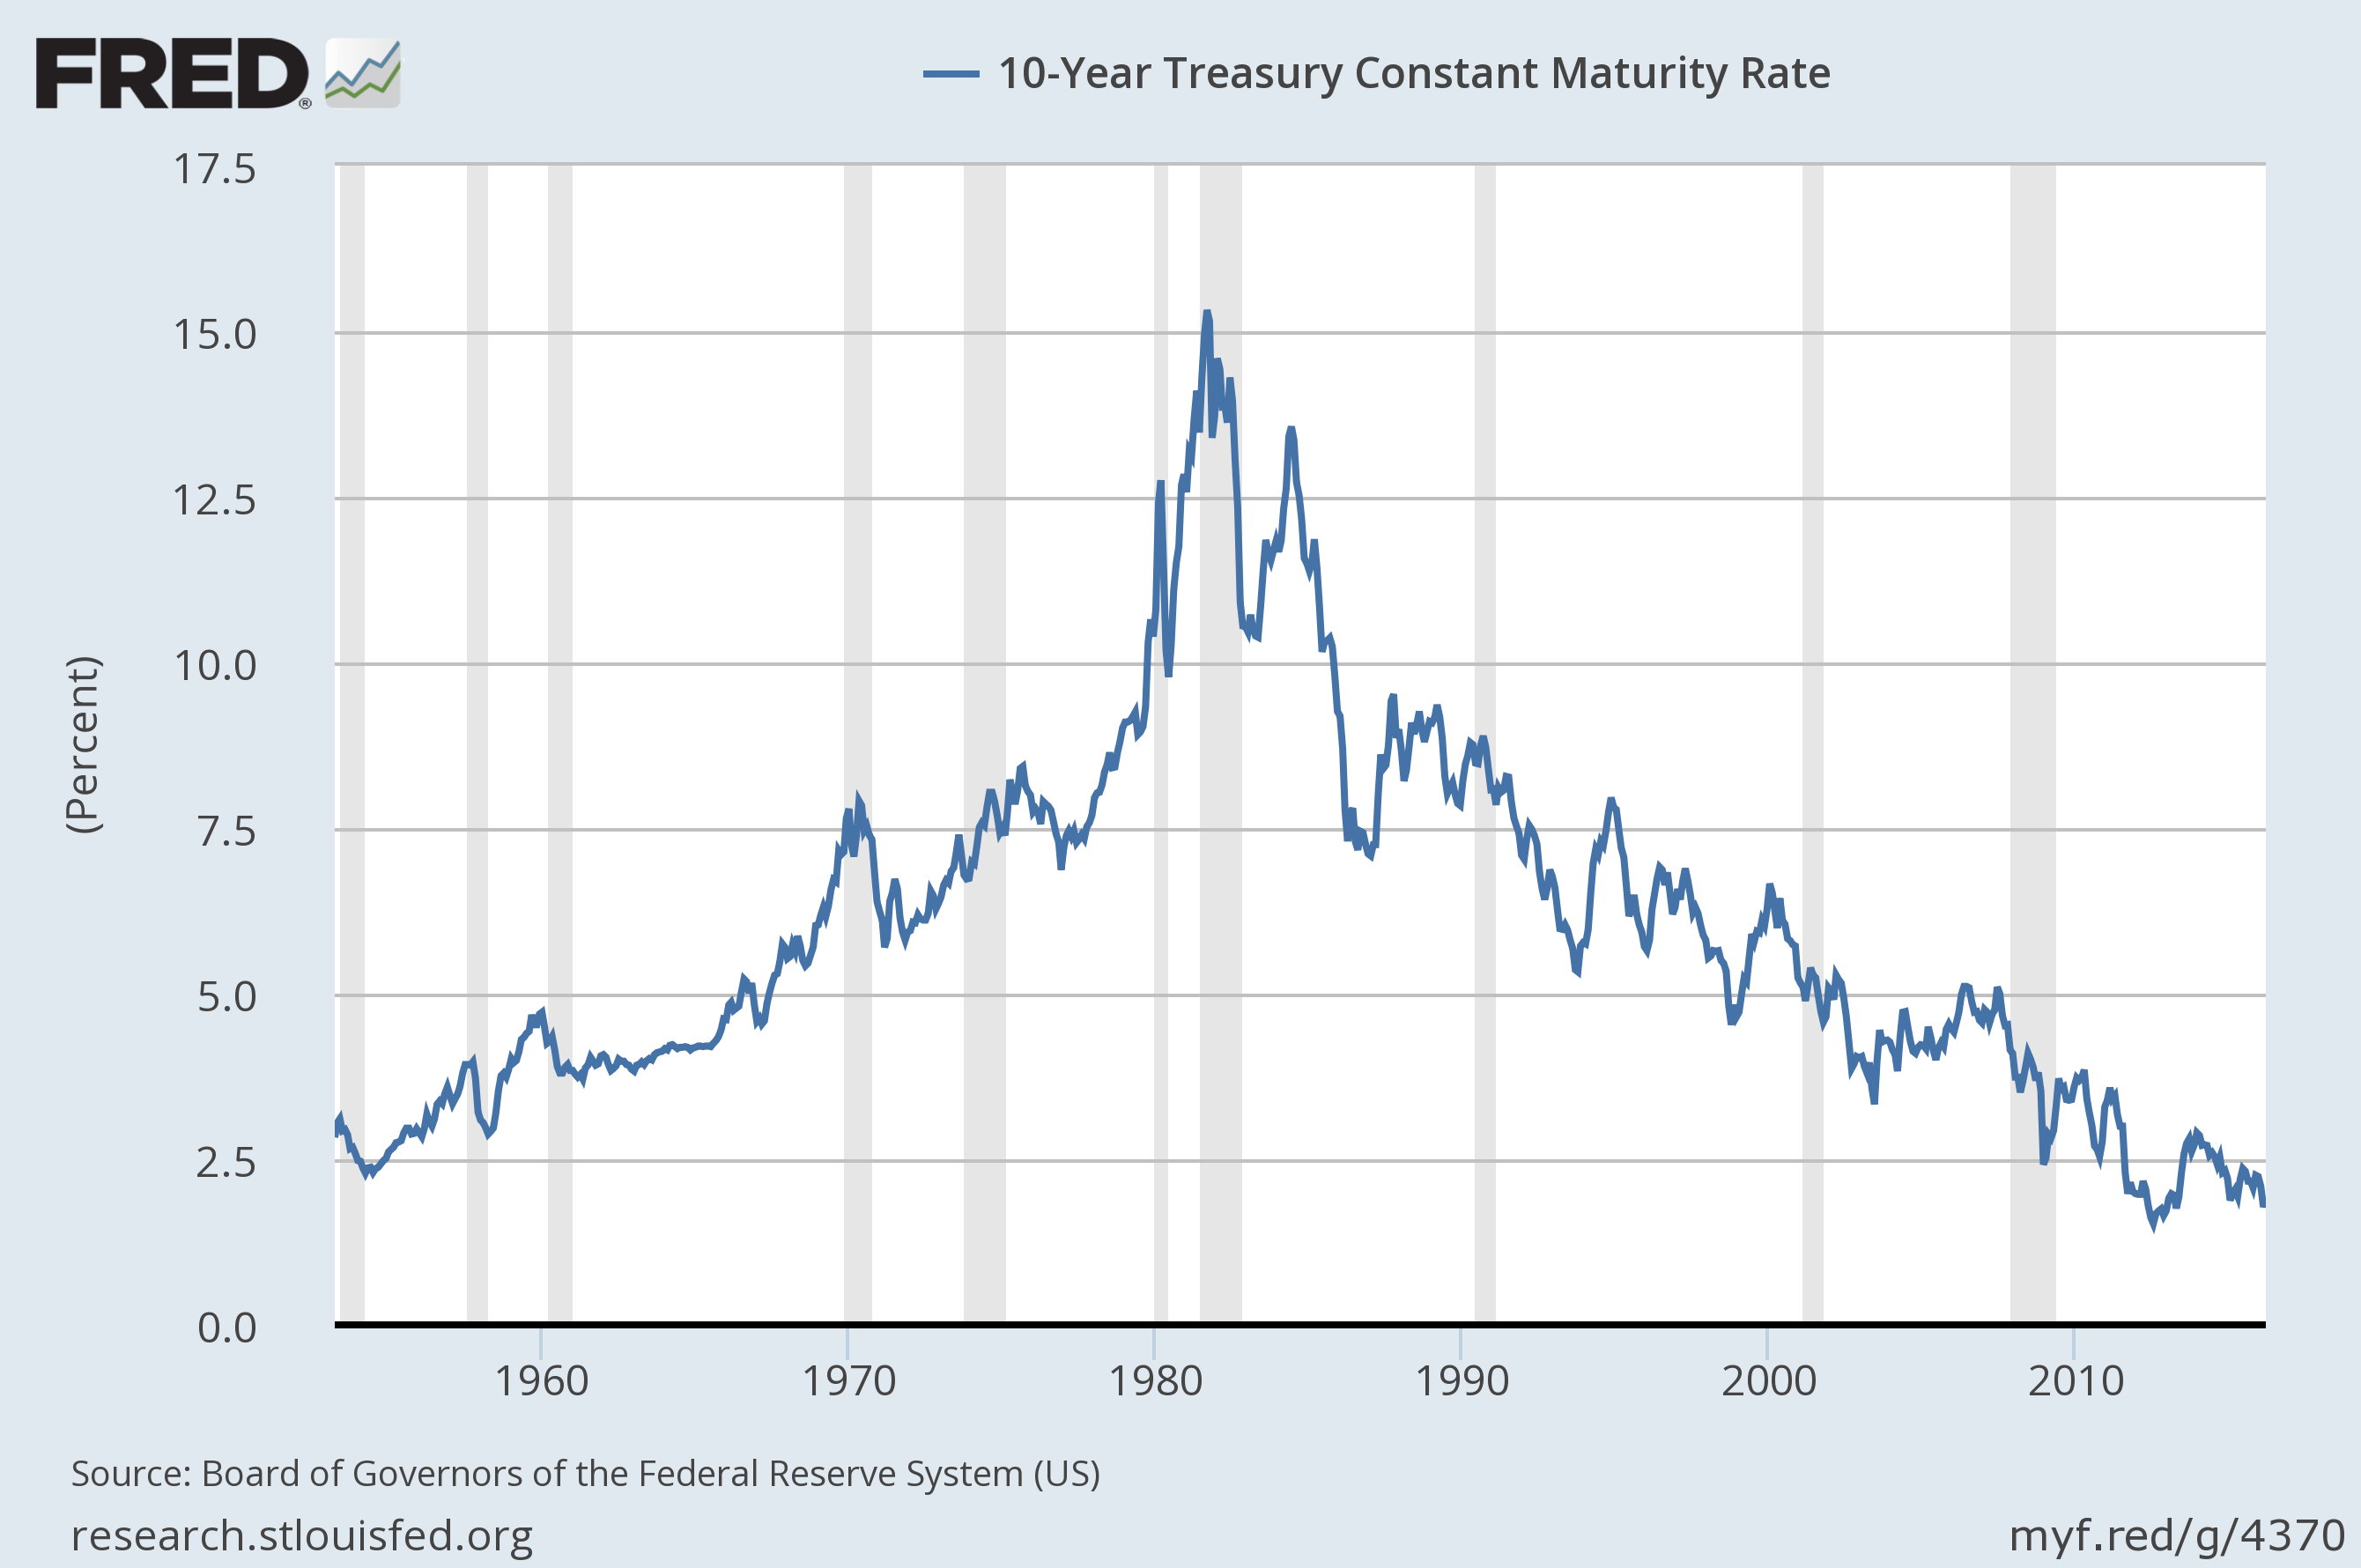 10-Year Treasury Interest Rates, Based On St. Louis Fed Dat